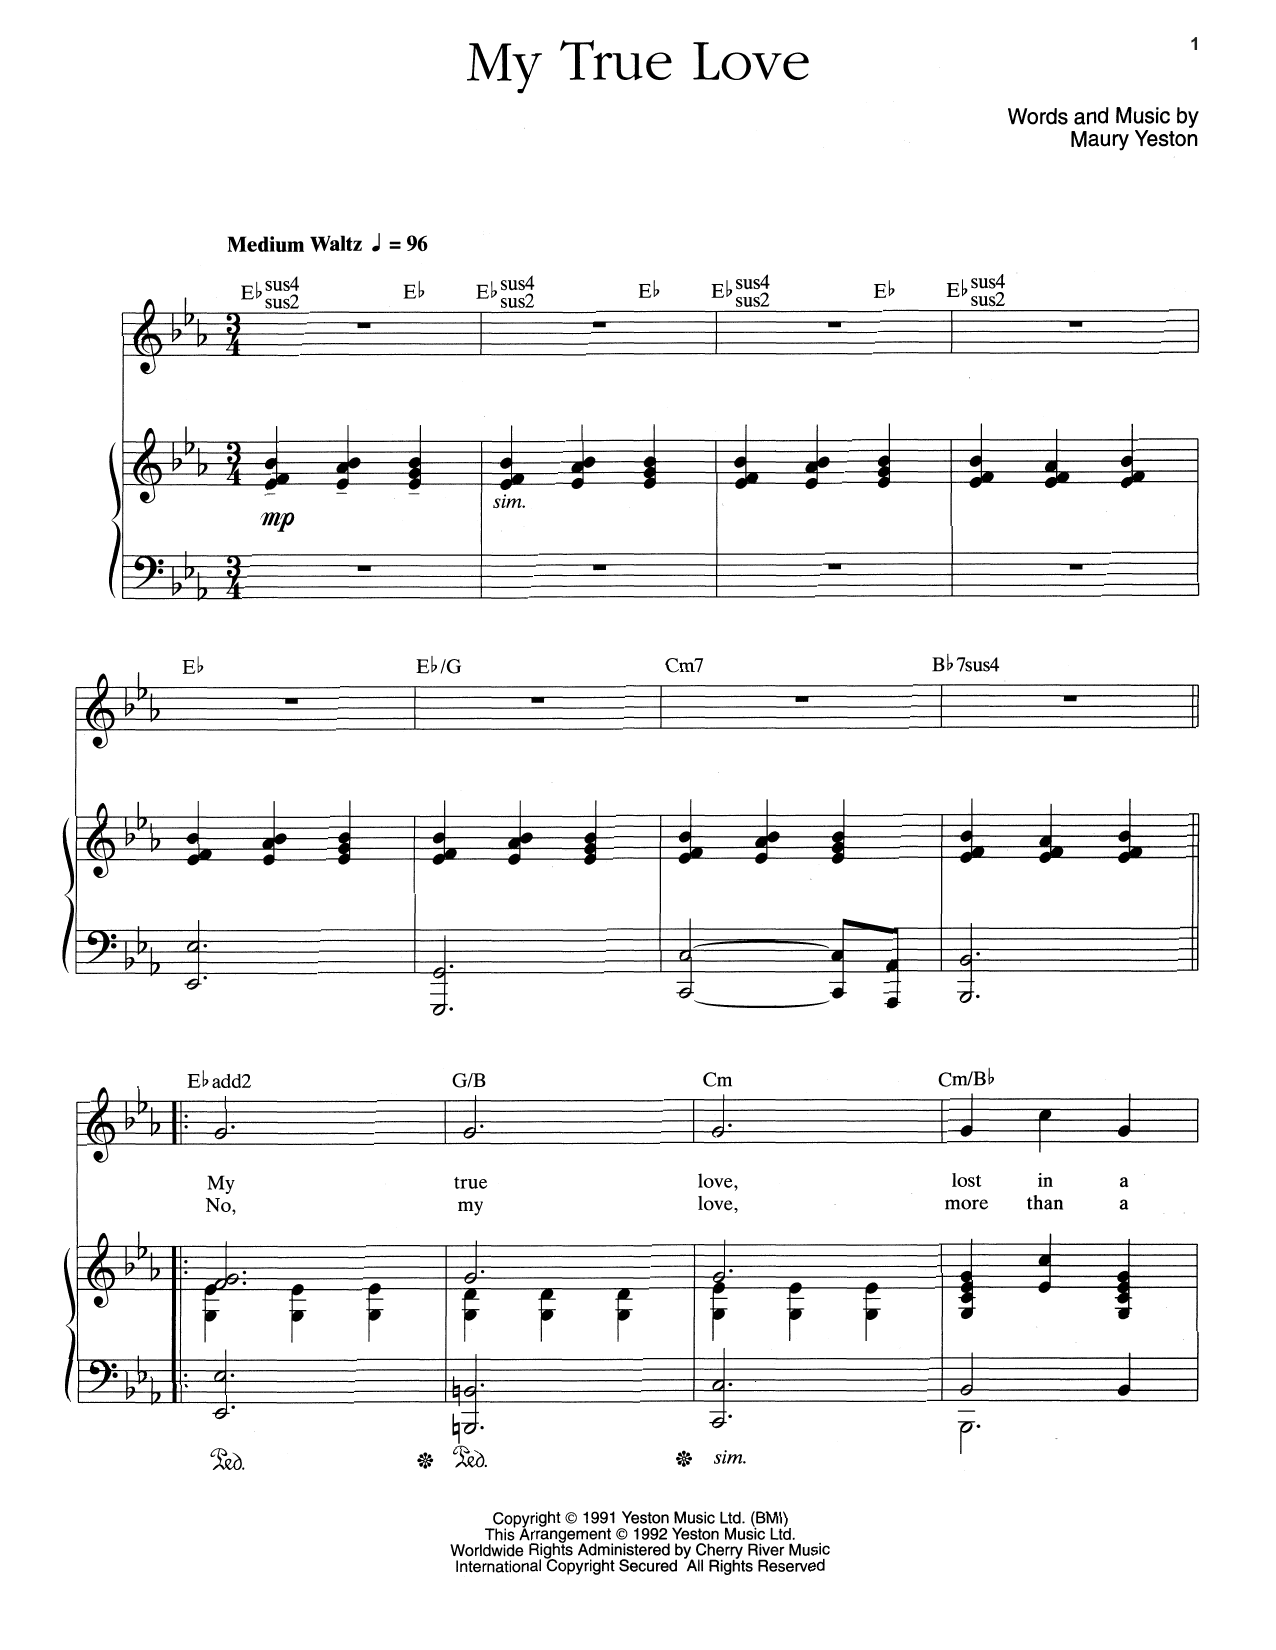 Maury Yeston My True Love sheet music notes and chords. Download Printable PDF.